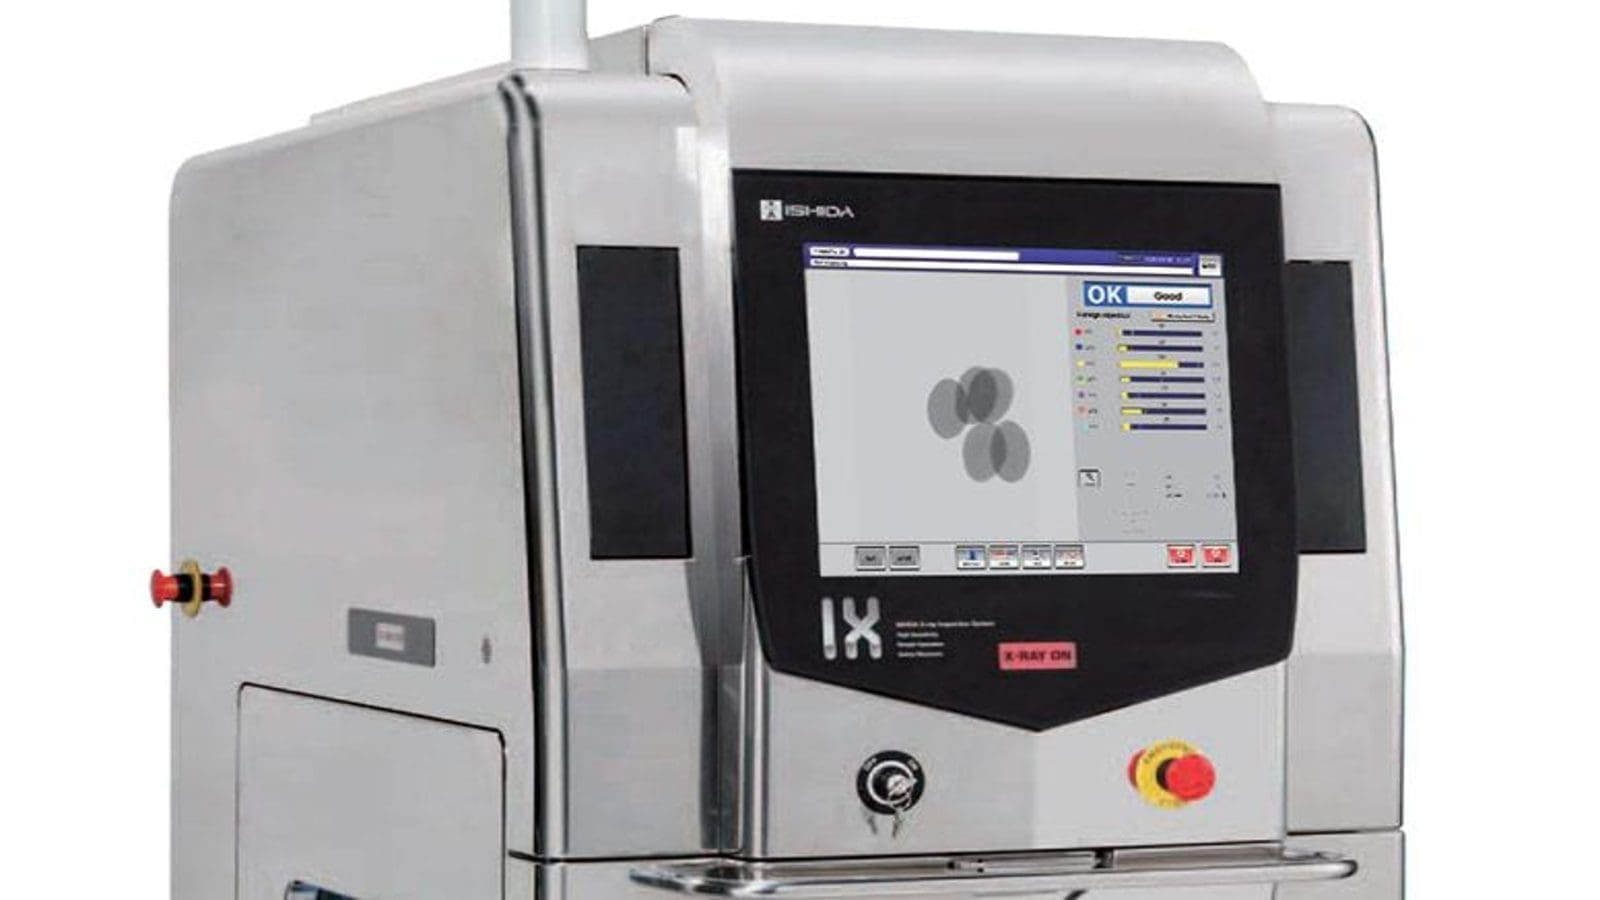 Ishida newly launched x-ray inspection system to enhance food safety in meat products